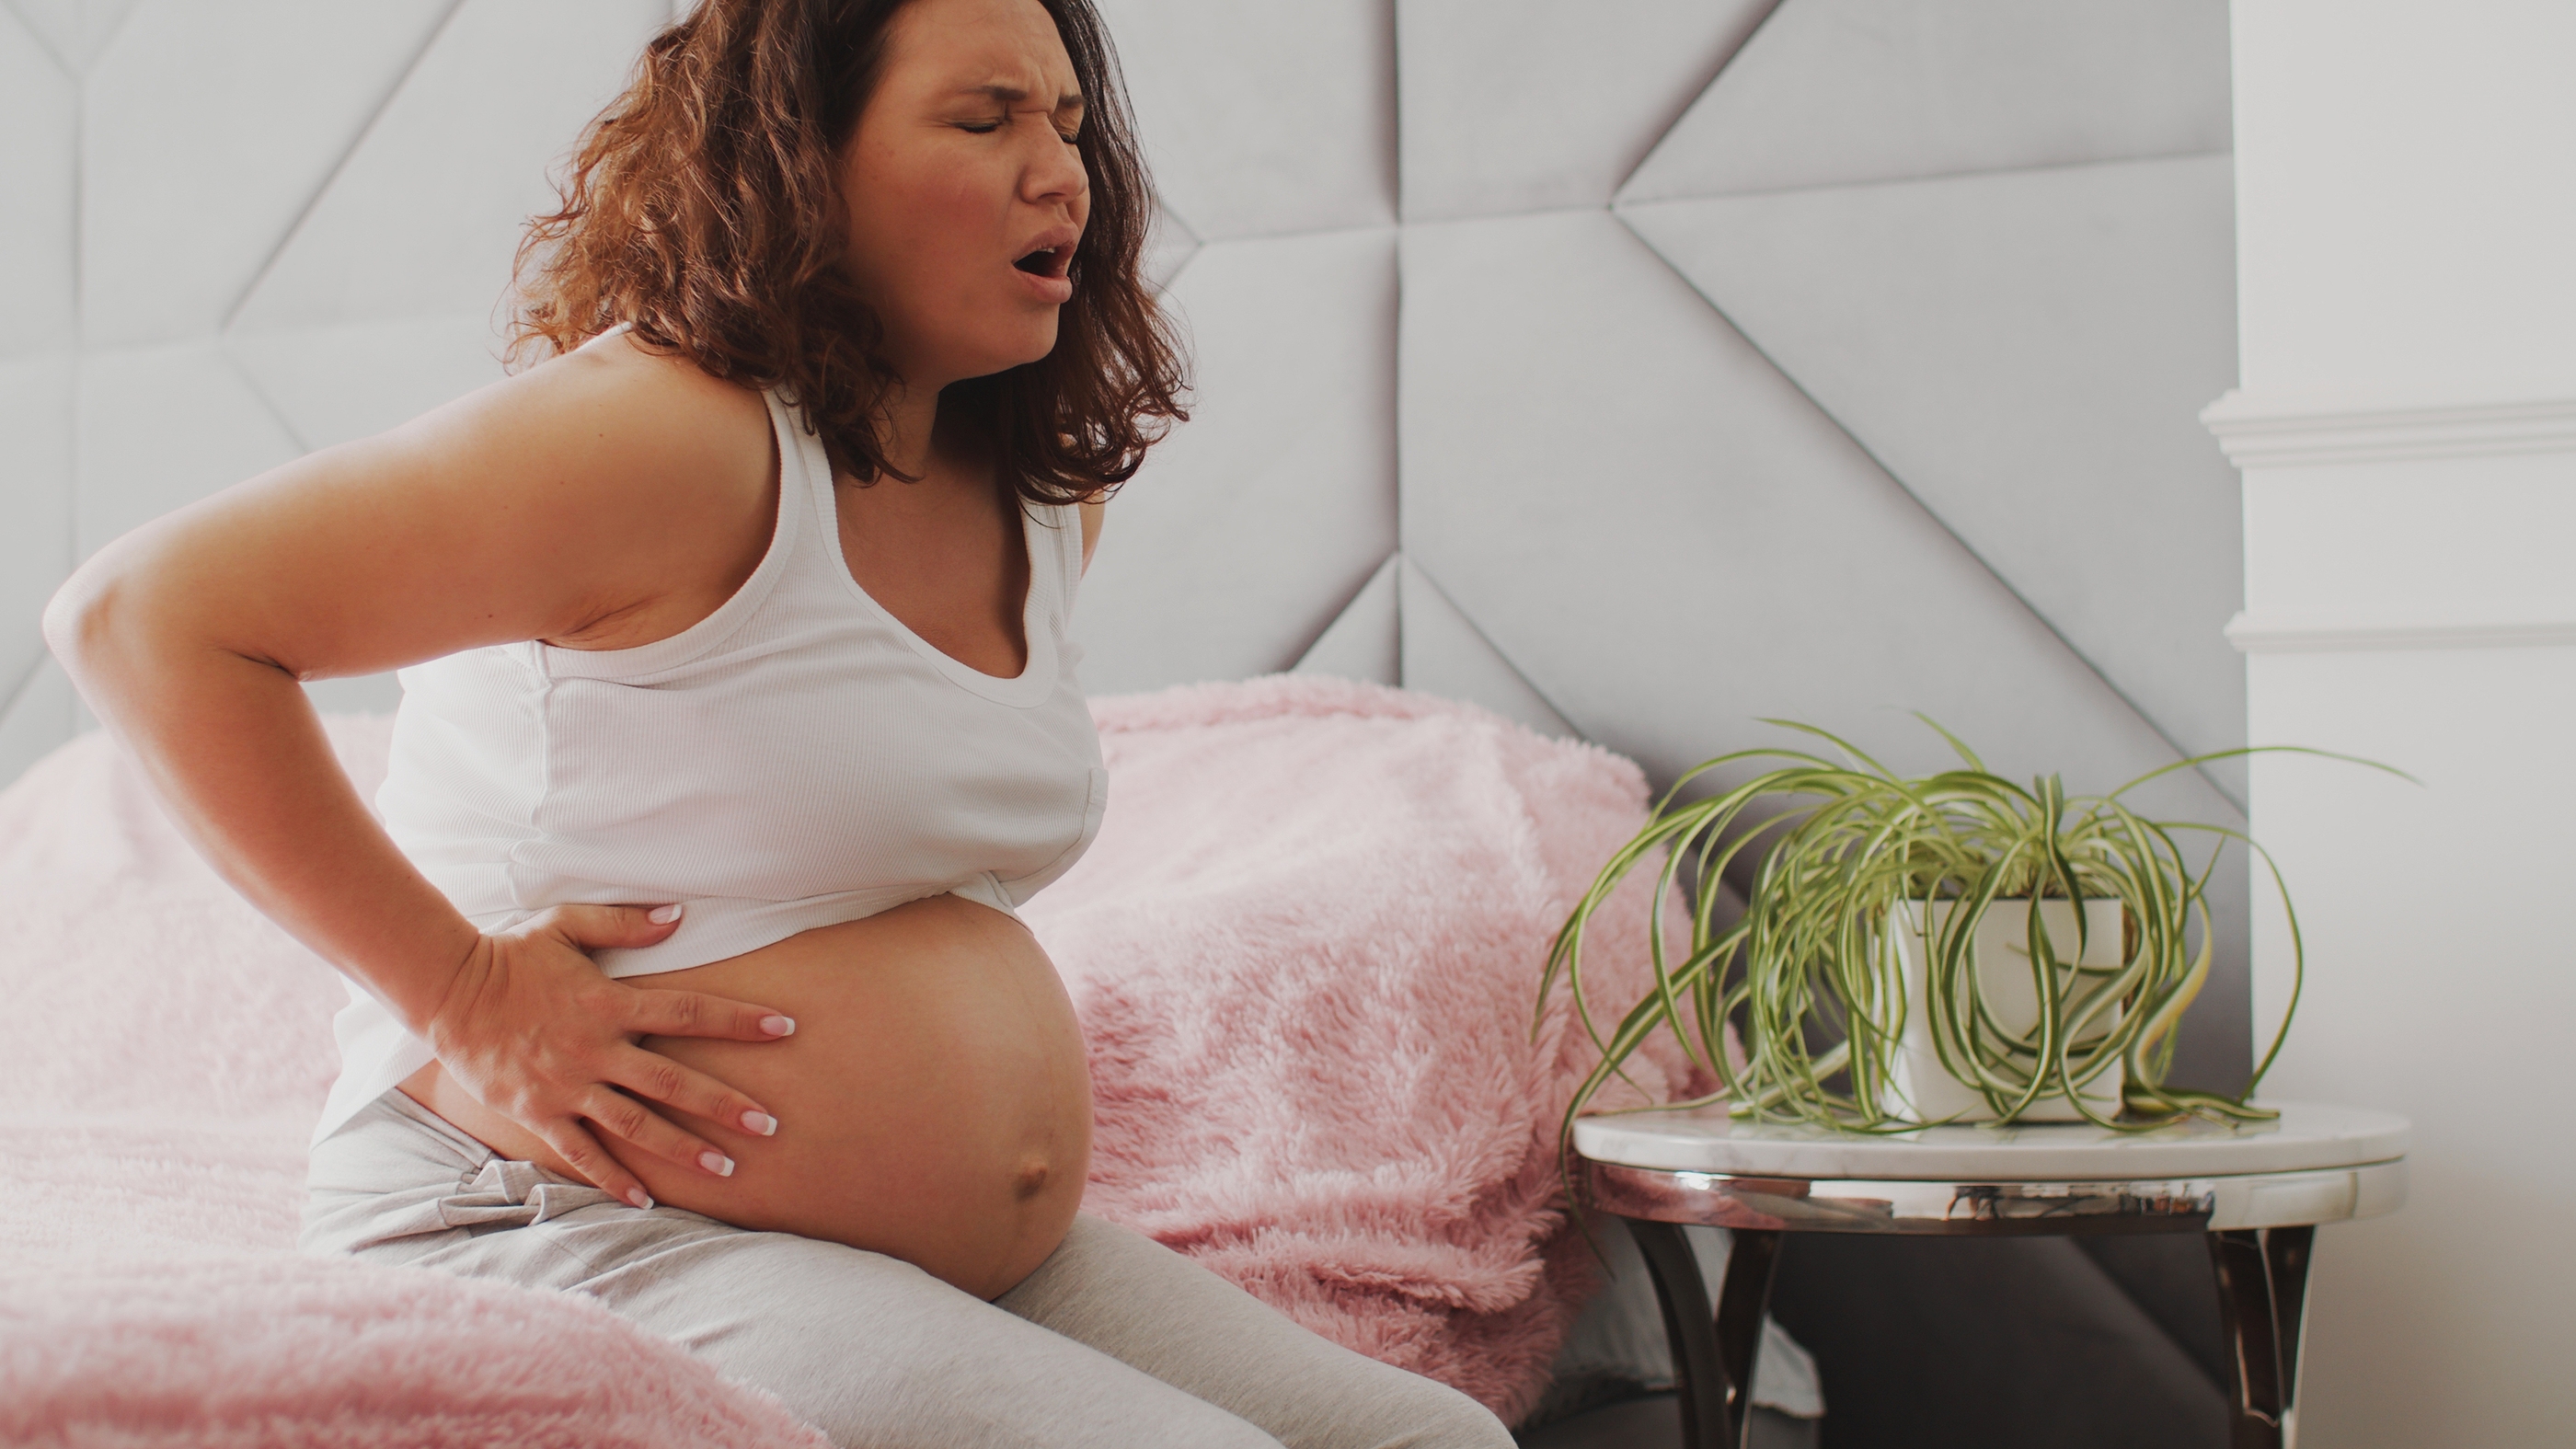 Kidney Stones While Pregnant: Symptoms and Treatment - Advanced